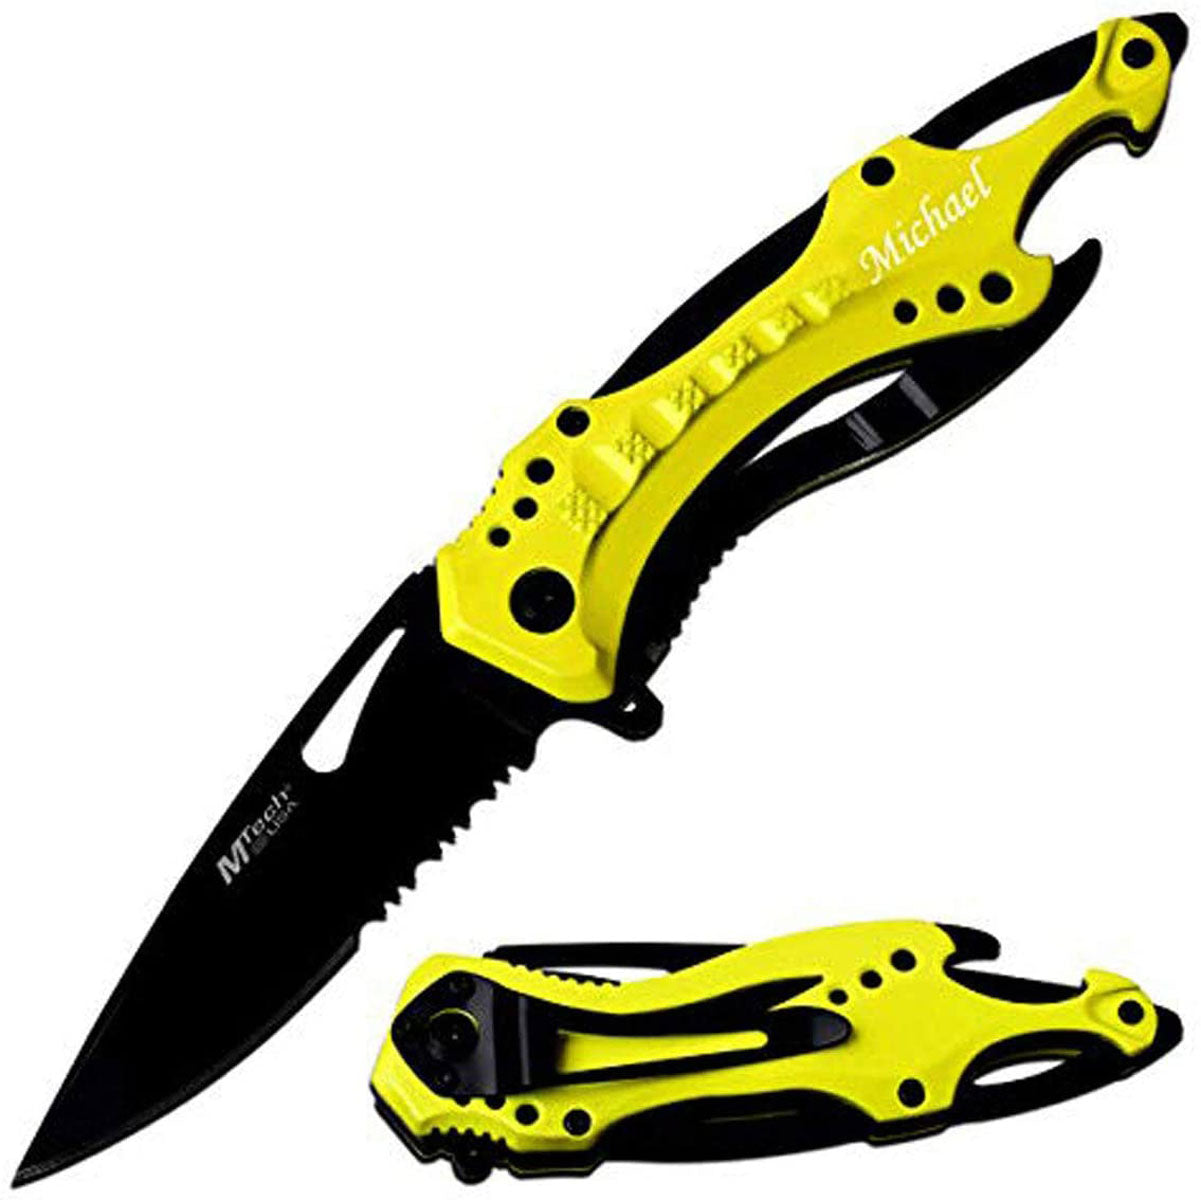 GIFTS INFINITY  4.5" Closed Personalized Engraved Folding Pocket Knife, Black Stainless Steel Tactical Blade Knife with Yellow Handle